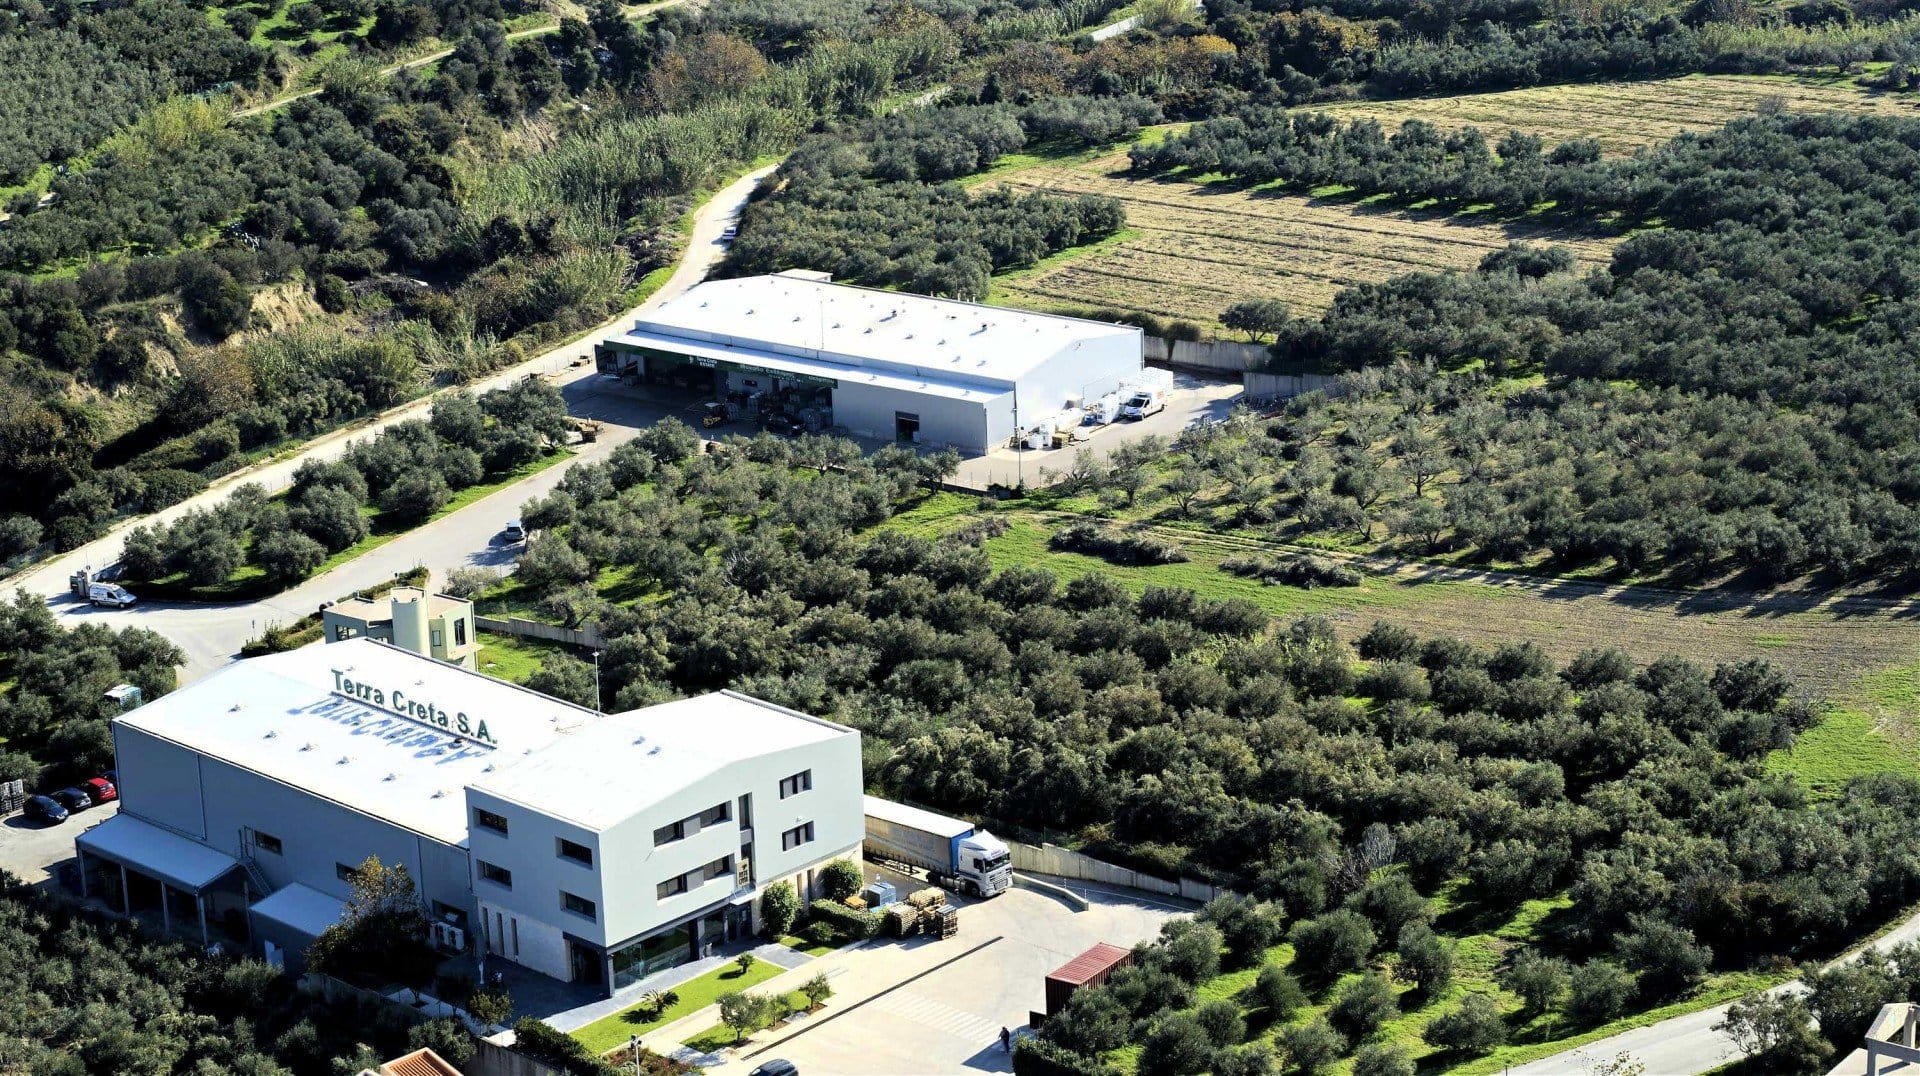 profiles-production-the-best-olive-oils-the-cretan-producer-who-leaves-nothing-to-chance-olive-oil-times